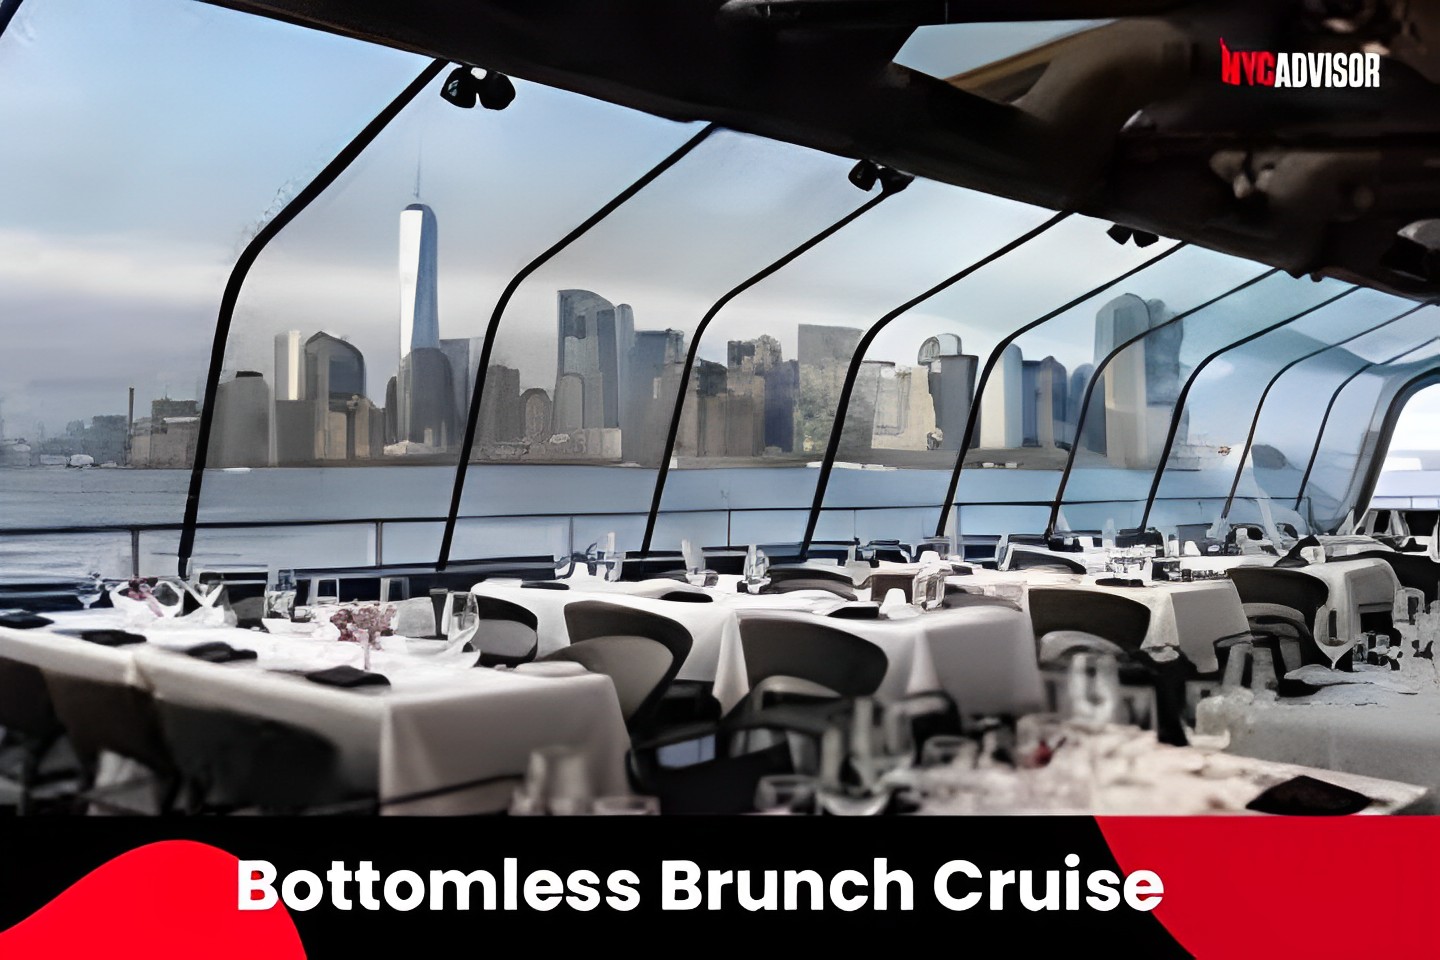 The Bottomless Brunch Cruise in NYC